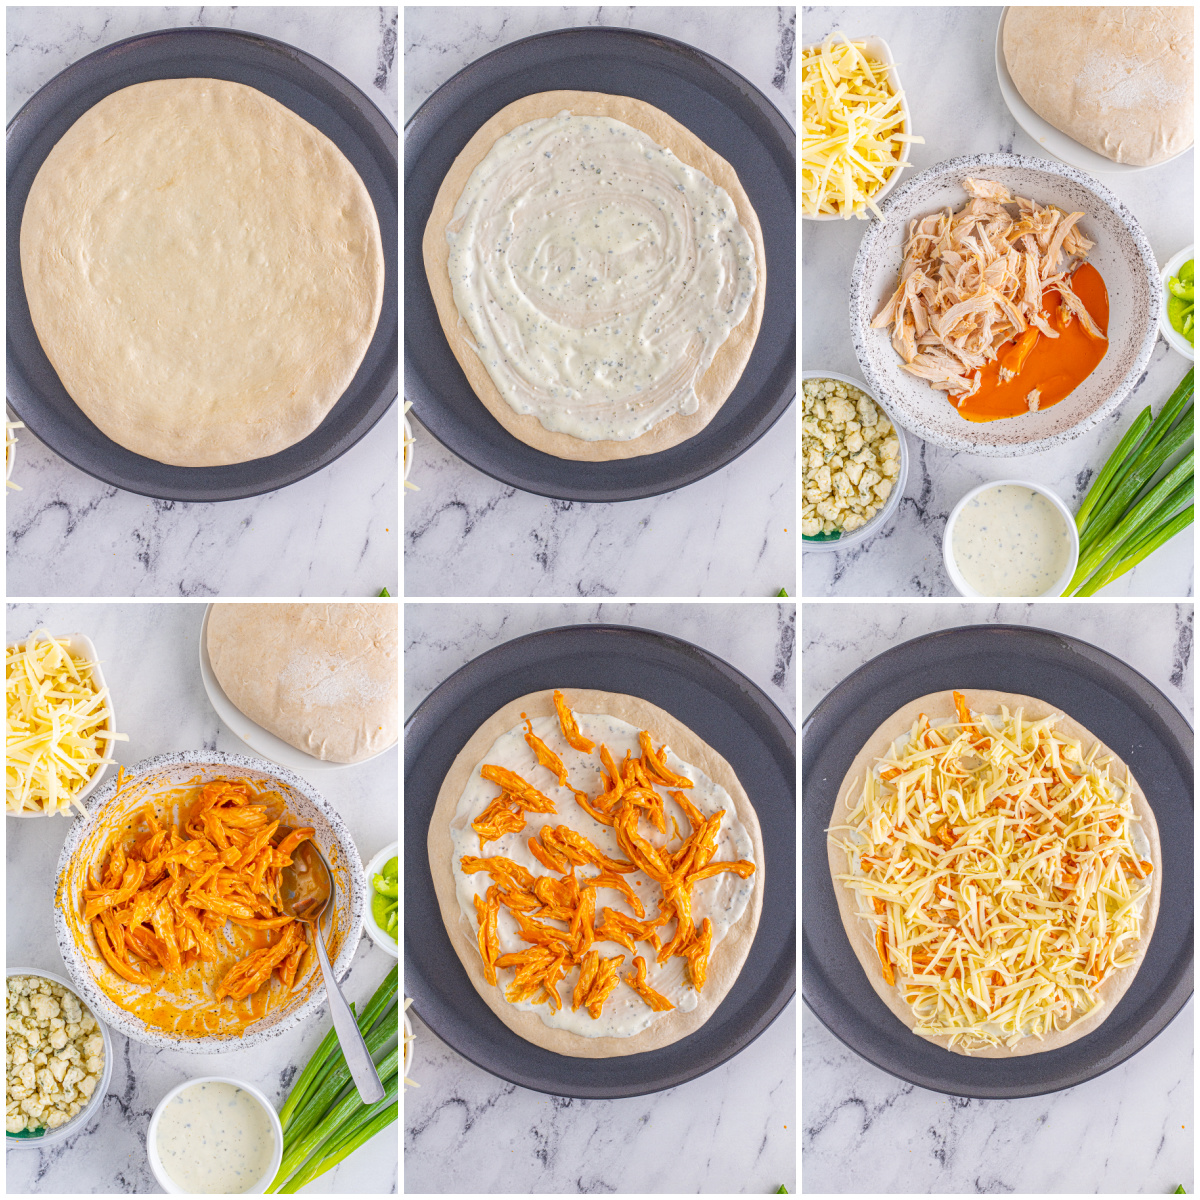 Step by step photos on how to make a Buffalo Chicken Pizza.